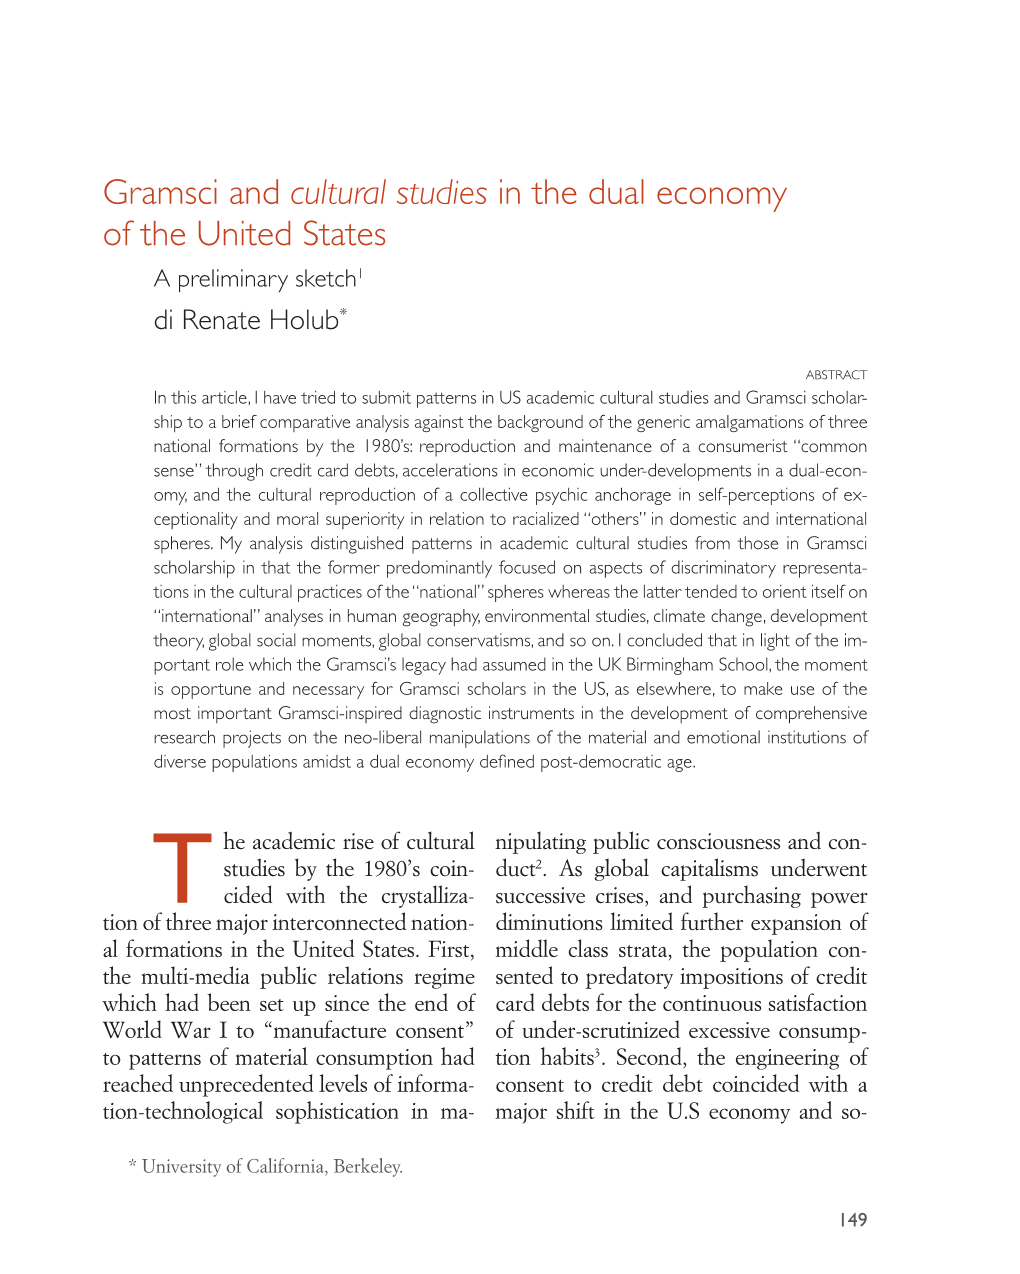 Gramsci and Cultural Studies in the Dual Economy of the United States a Preliminary Sketch1 Di Renate Holub*